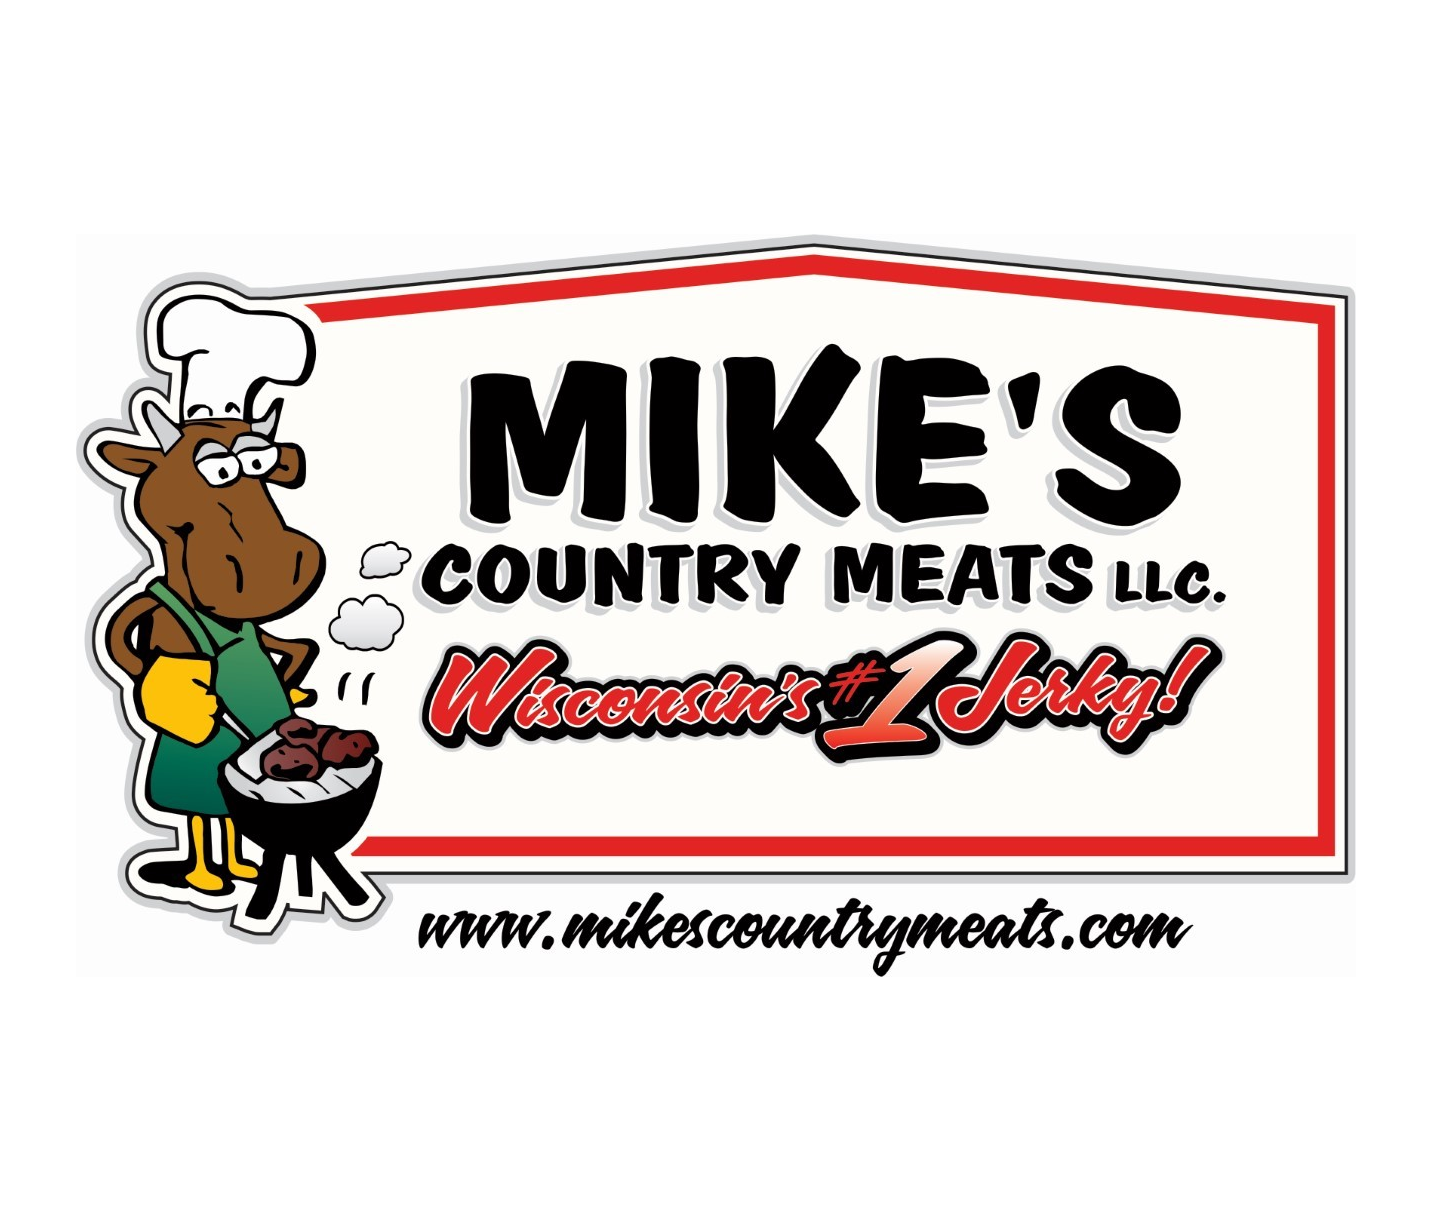 Wisconsin’s #1 Jerky - Mike's Country Meats